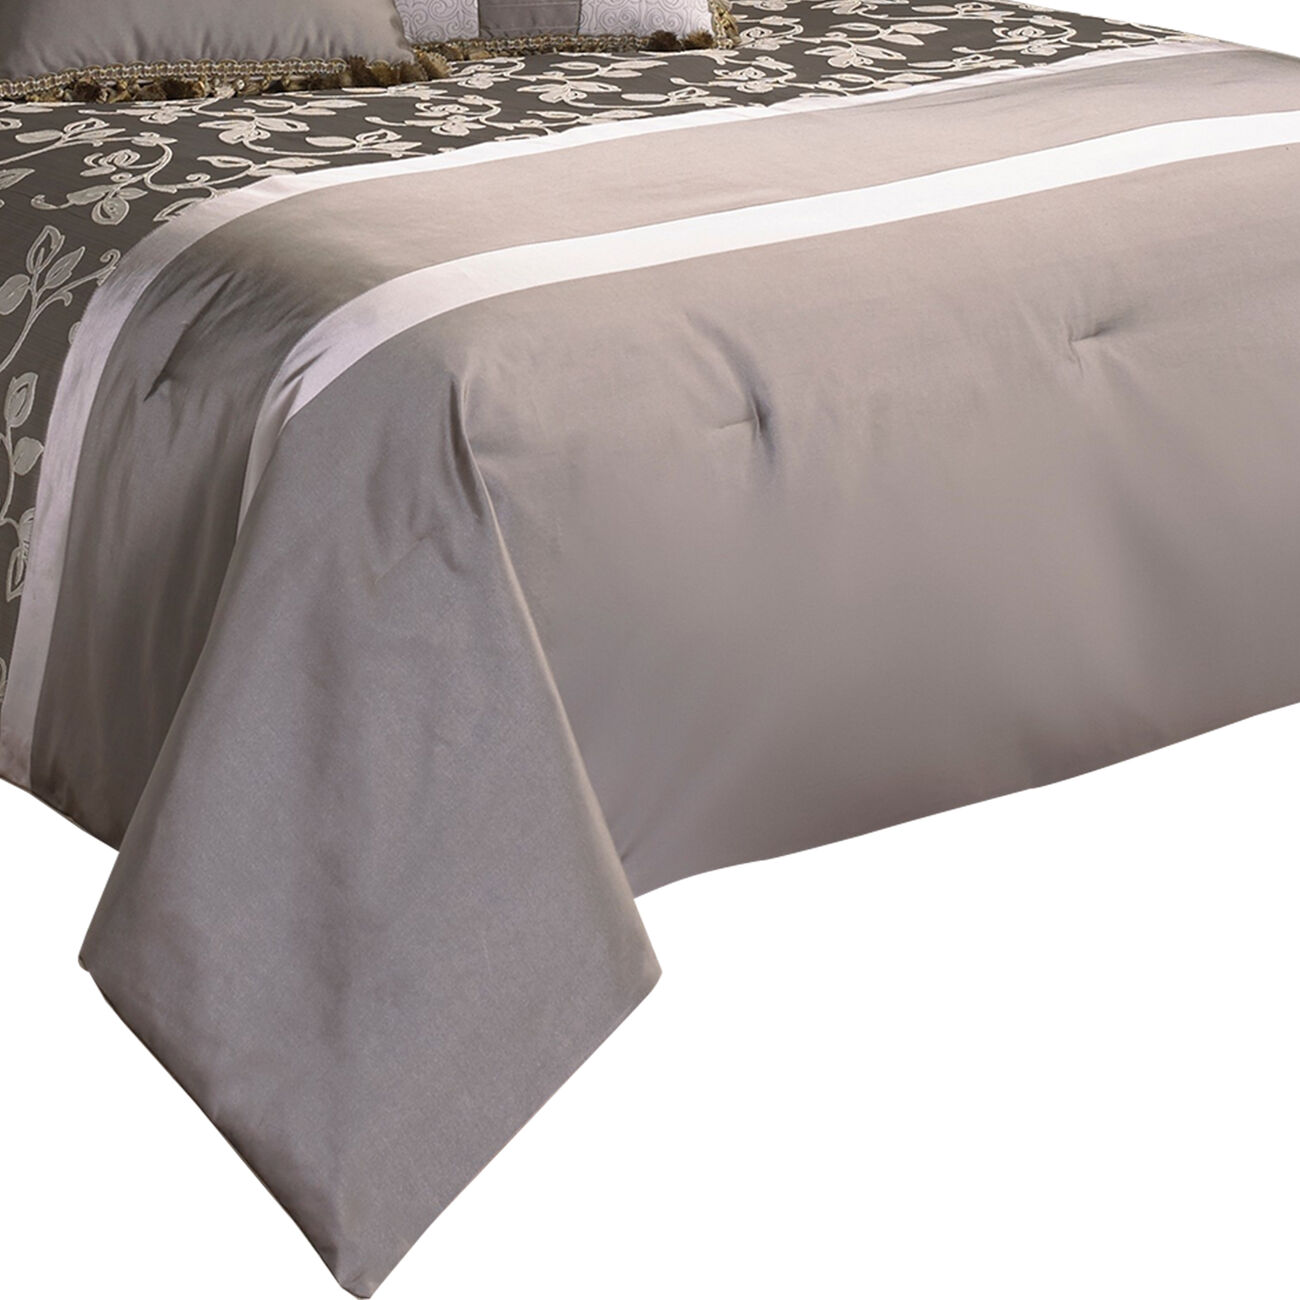 9 Piece Queen Polyester Comforter Set with Leaf Print, Platinum Gray